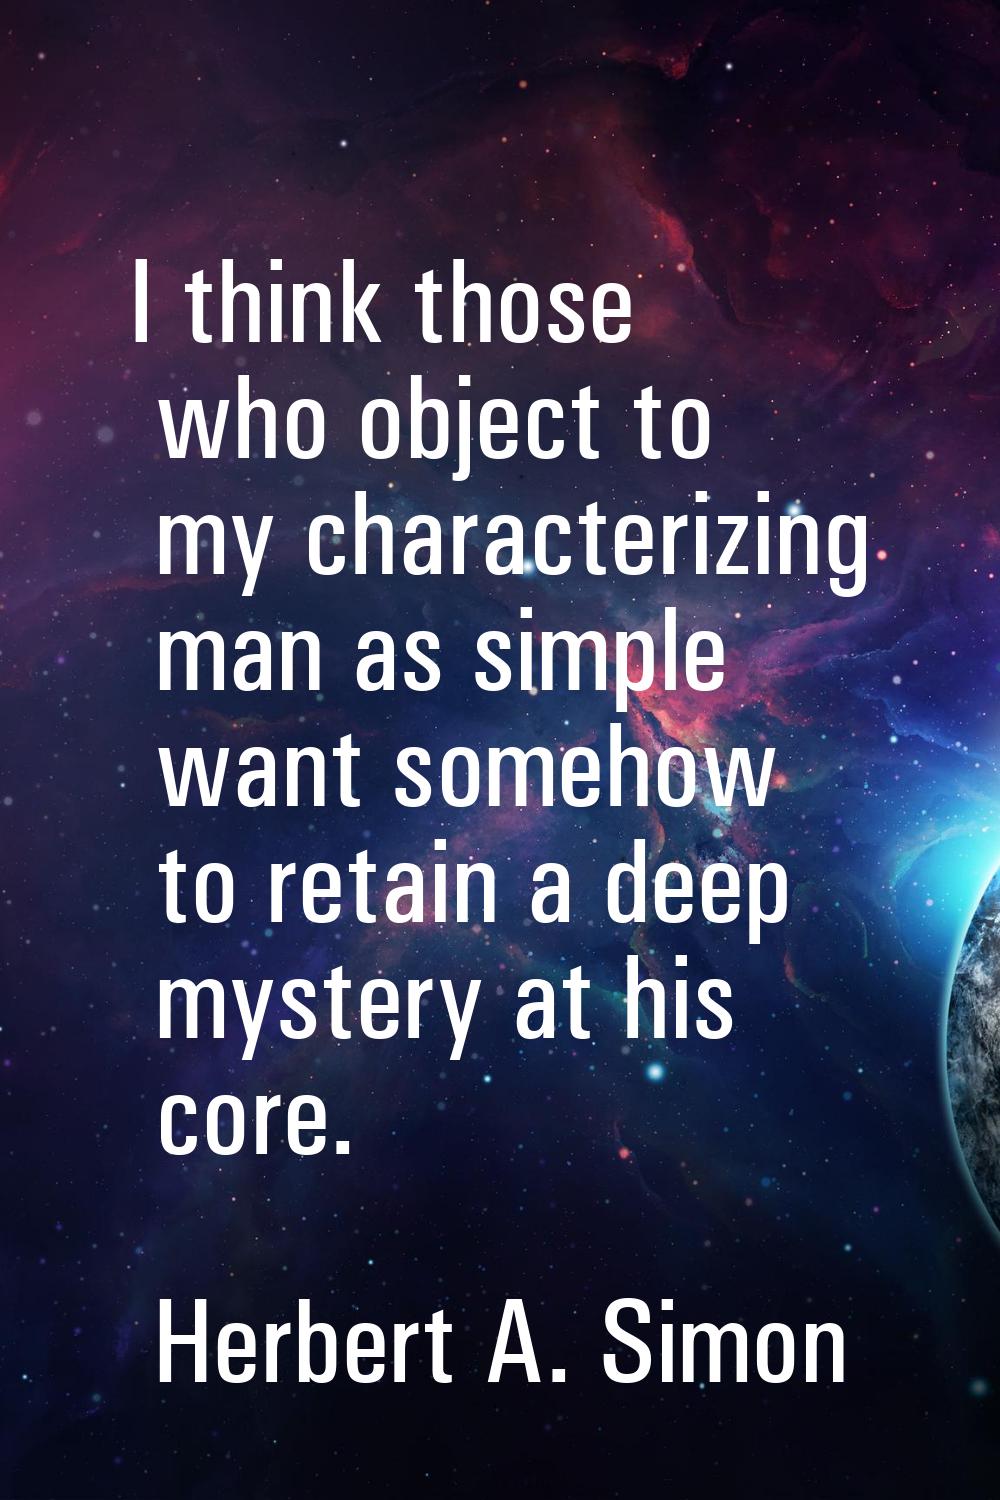 I think those who object to my characterizing man as simple want somehow to retain a deep mystery a